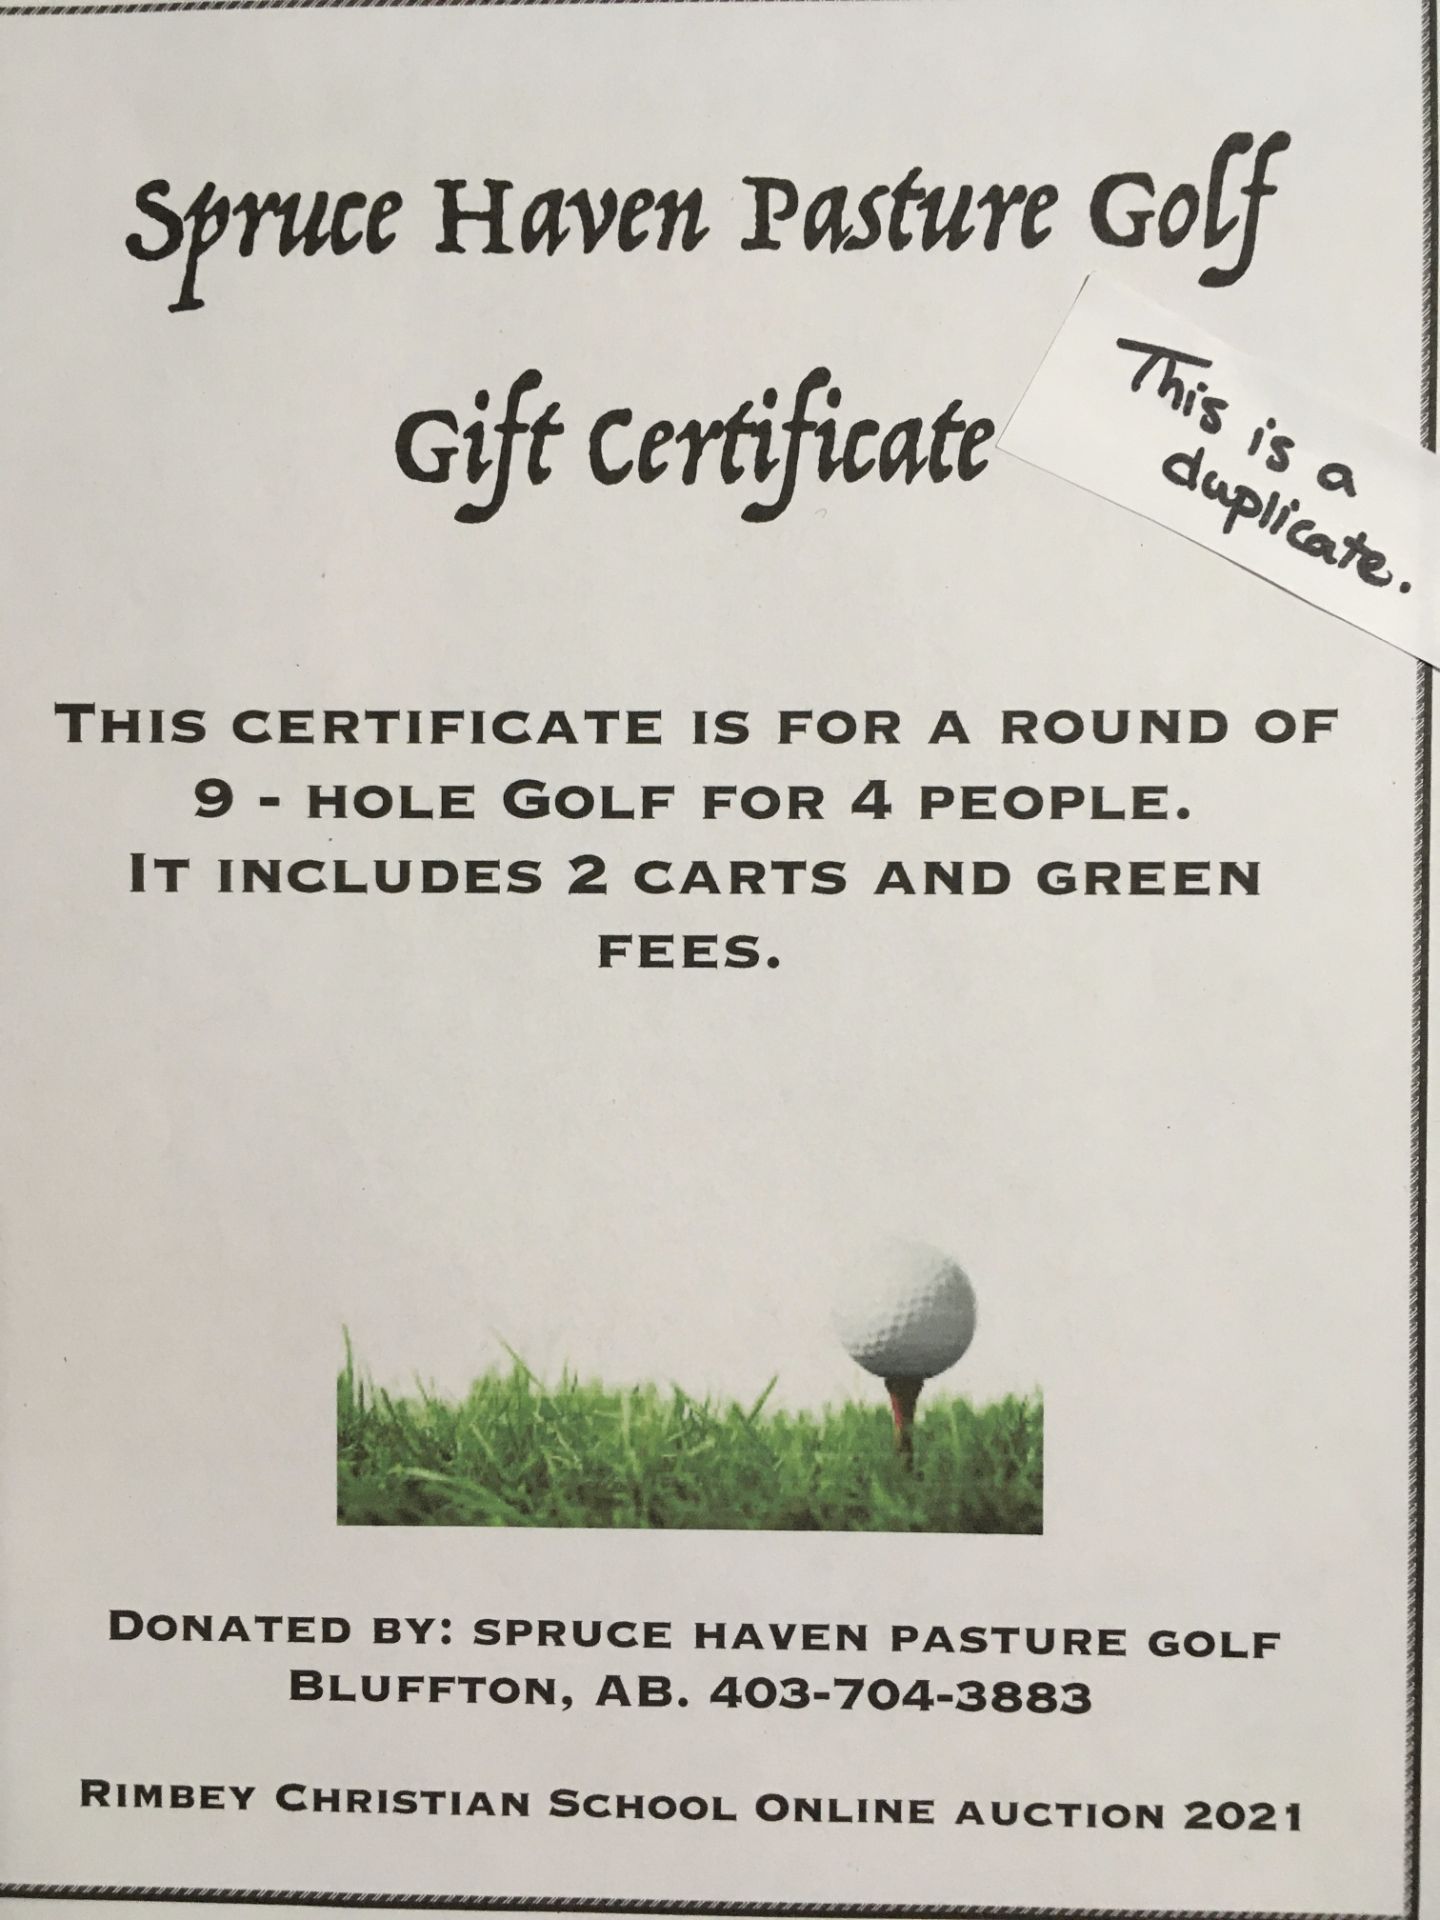 SPRUCE HAVEN PASTURE GOLF GIFT CERTIFICATE Certificate is for a round of 9 - hole golf for 4 people. - Image 2 of 2